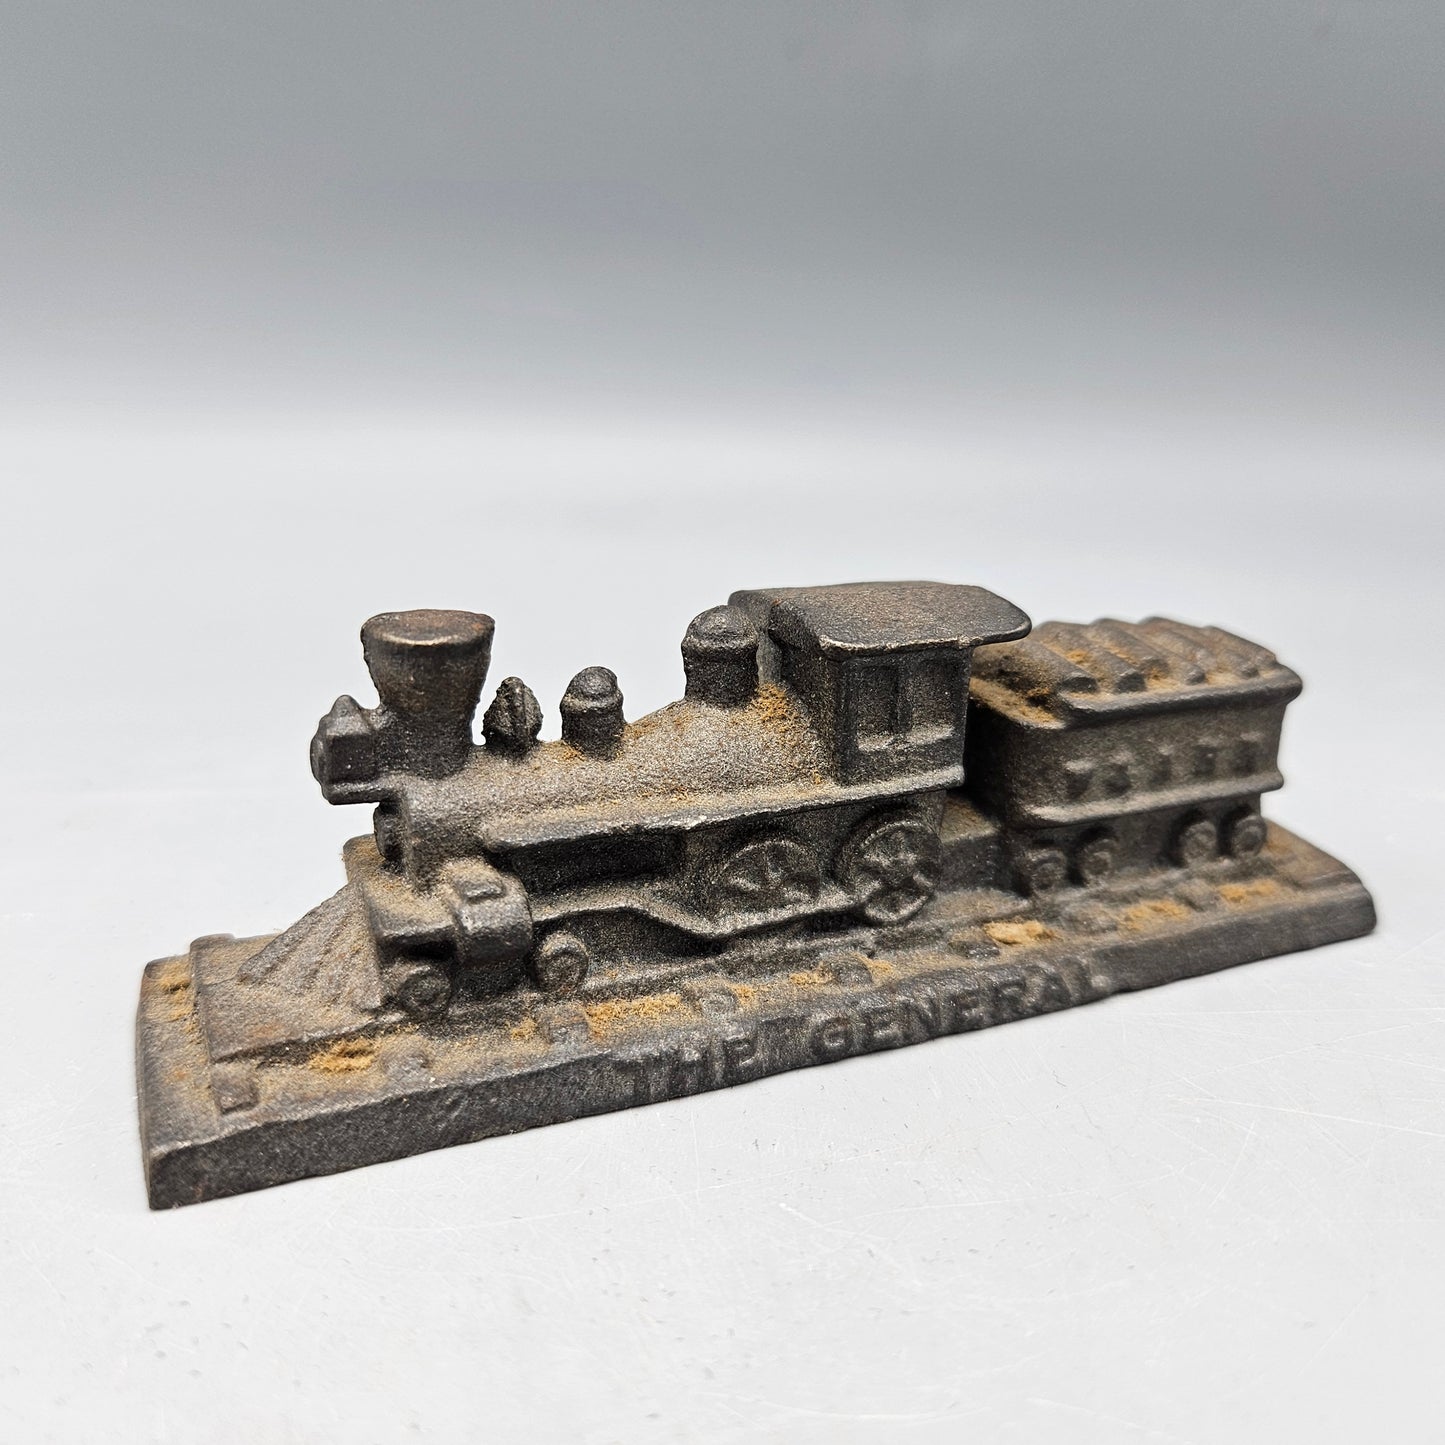 Cast Iron Steam Locomotive Paperweight "The General"